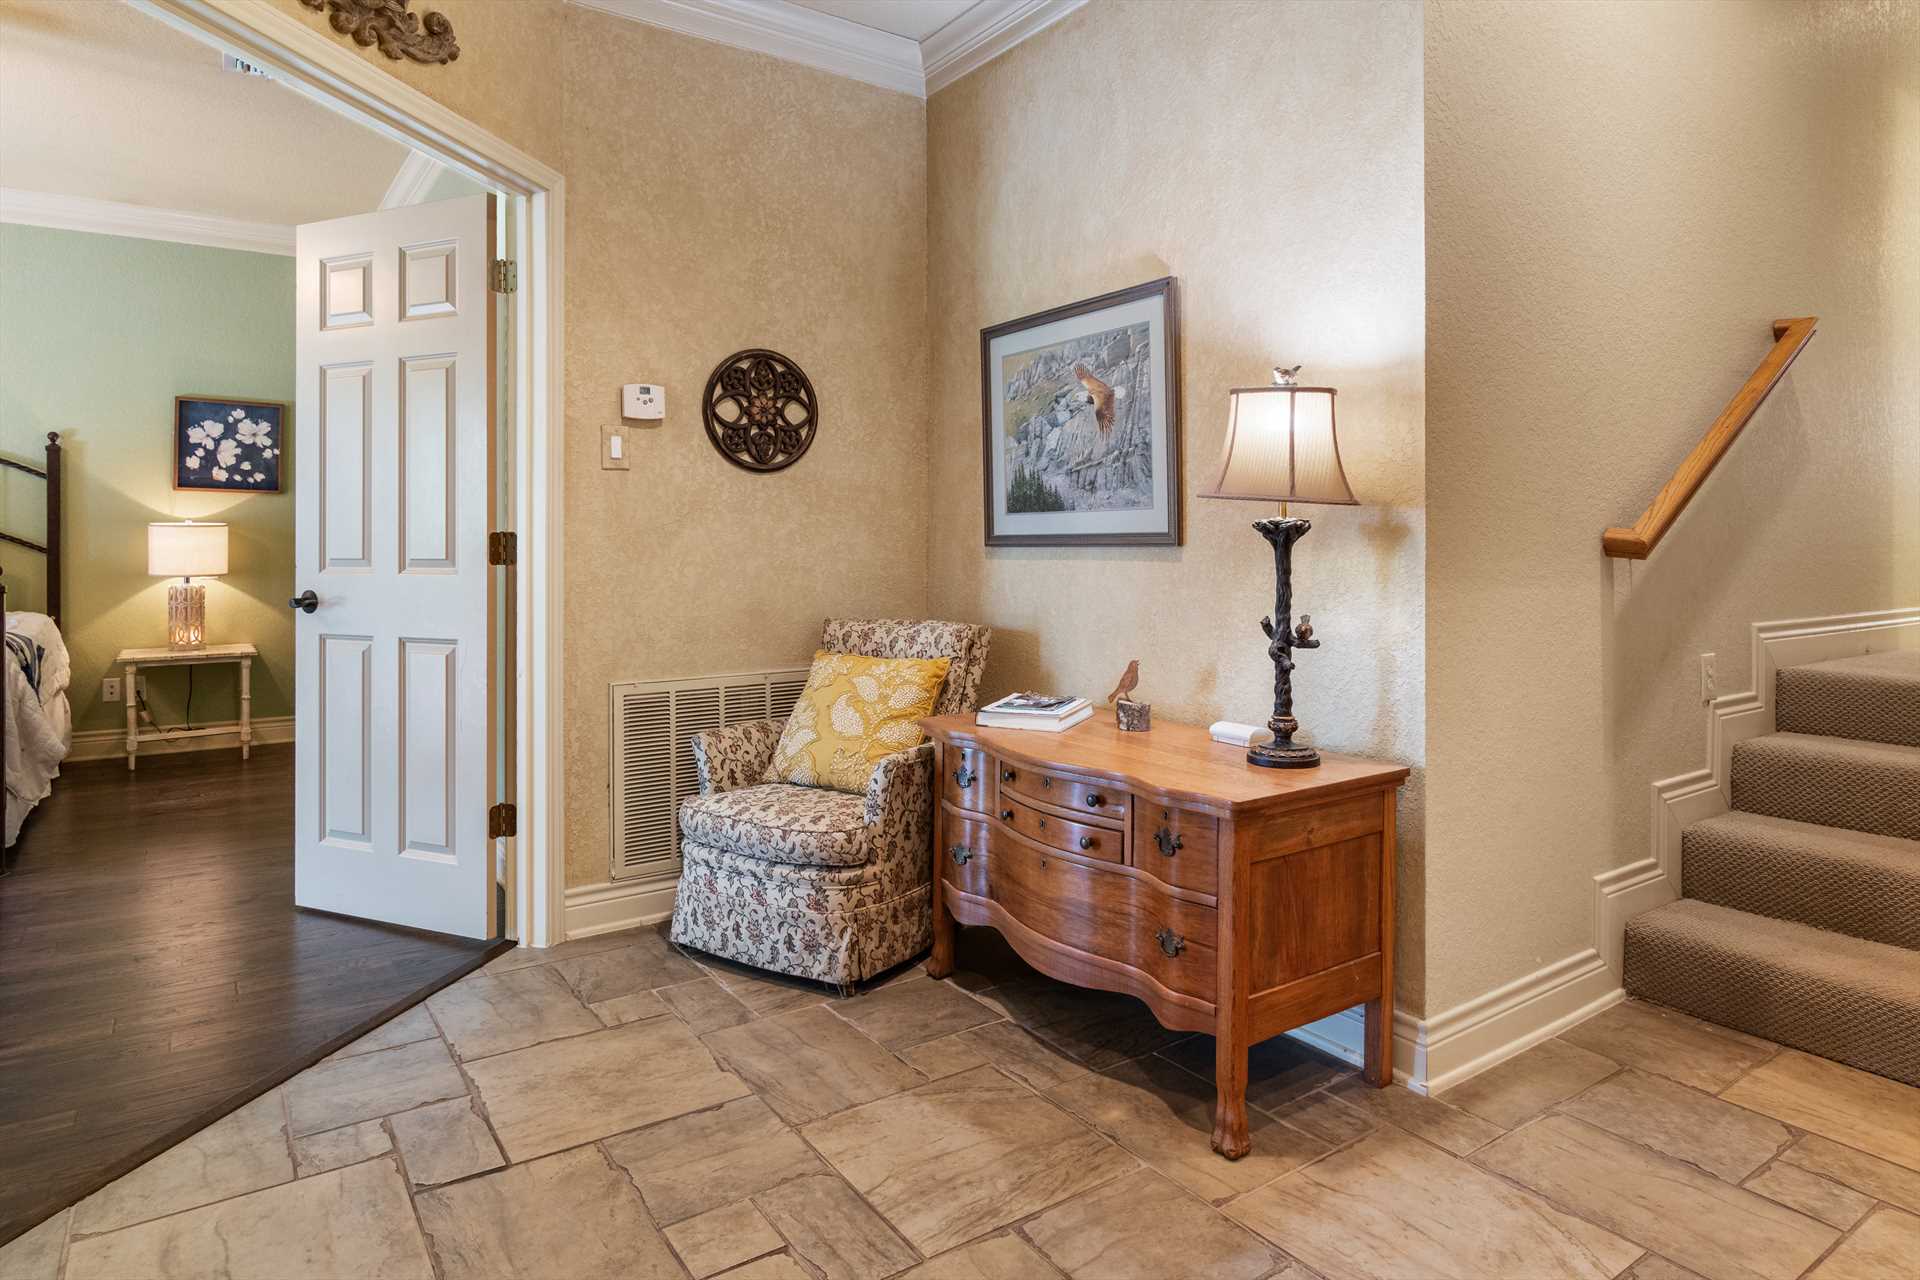                                                 Right outside the master bedroom, there's an intimate and private little reading nook!